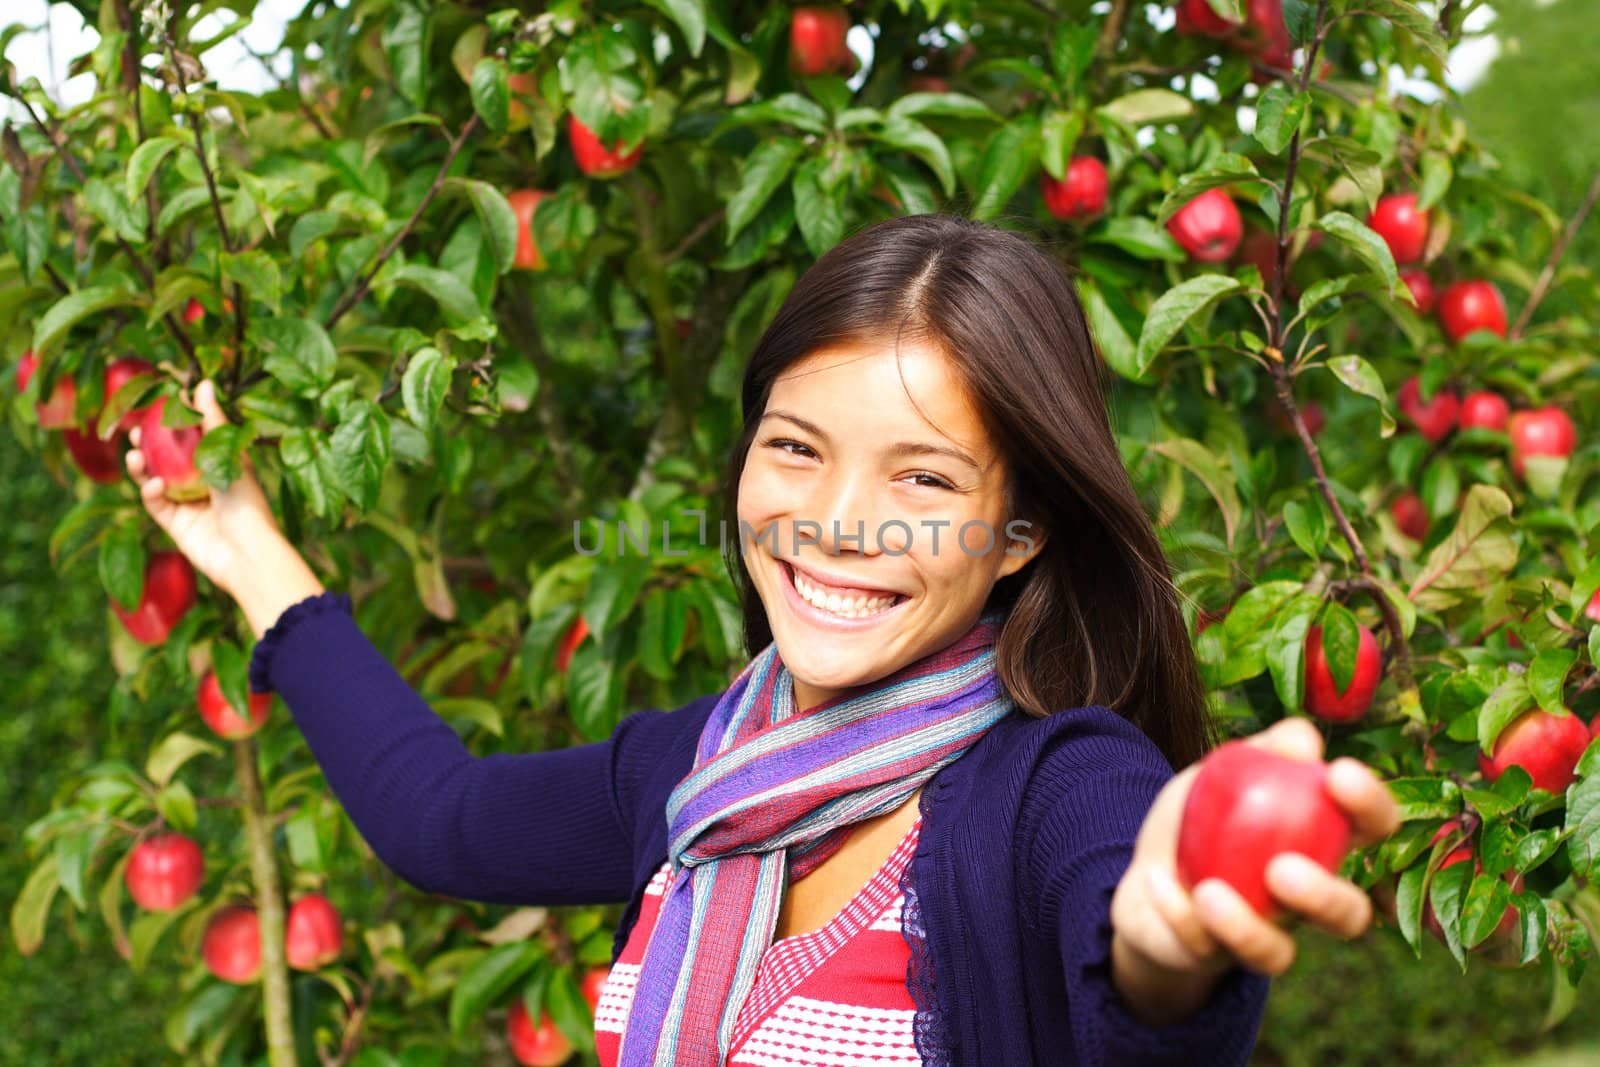 Smiling autumn woman picking and giving apples from tree.